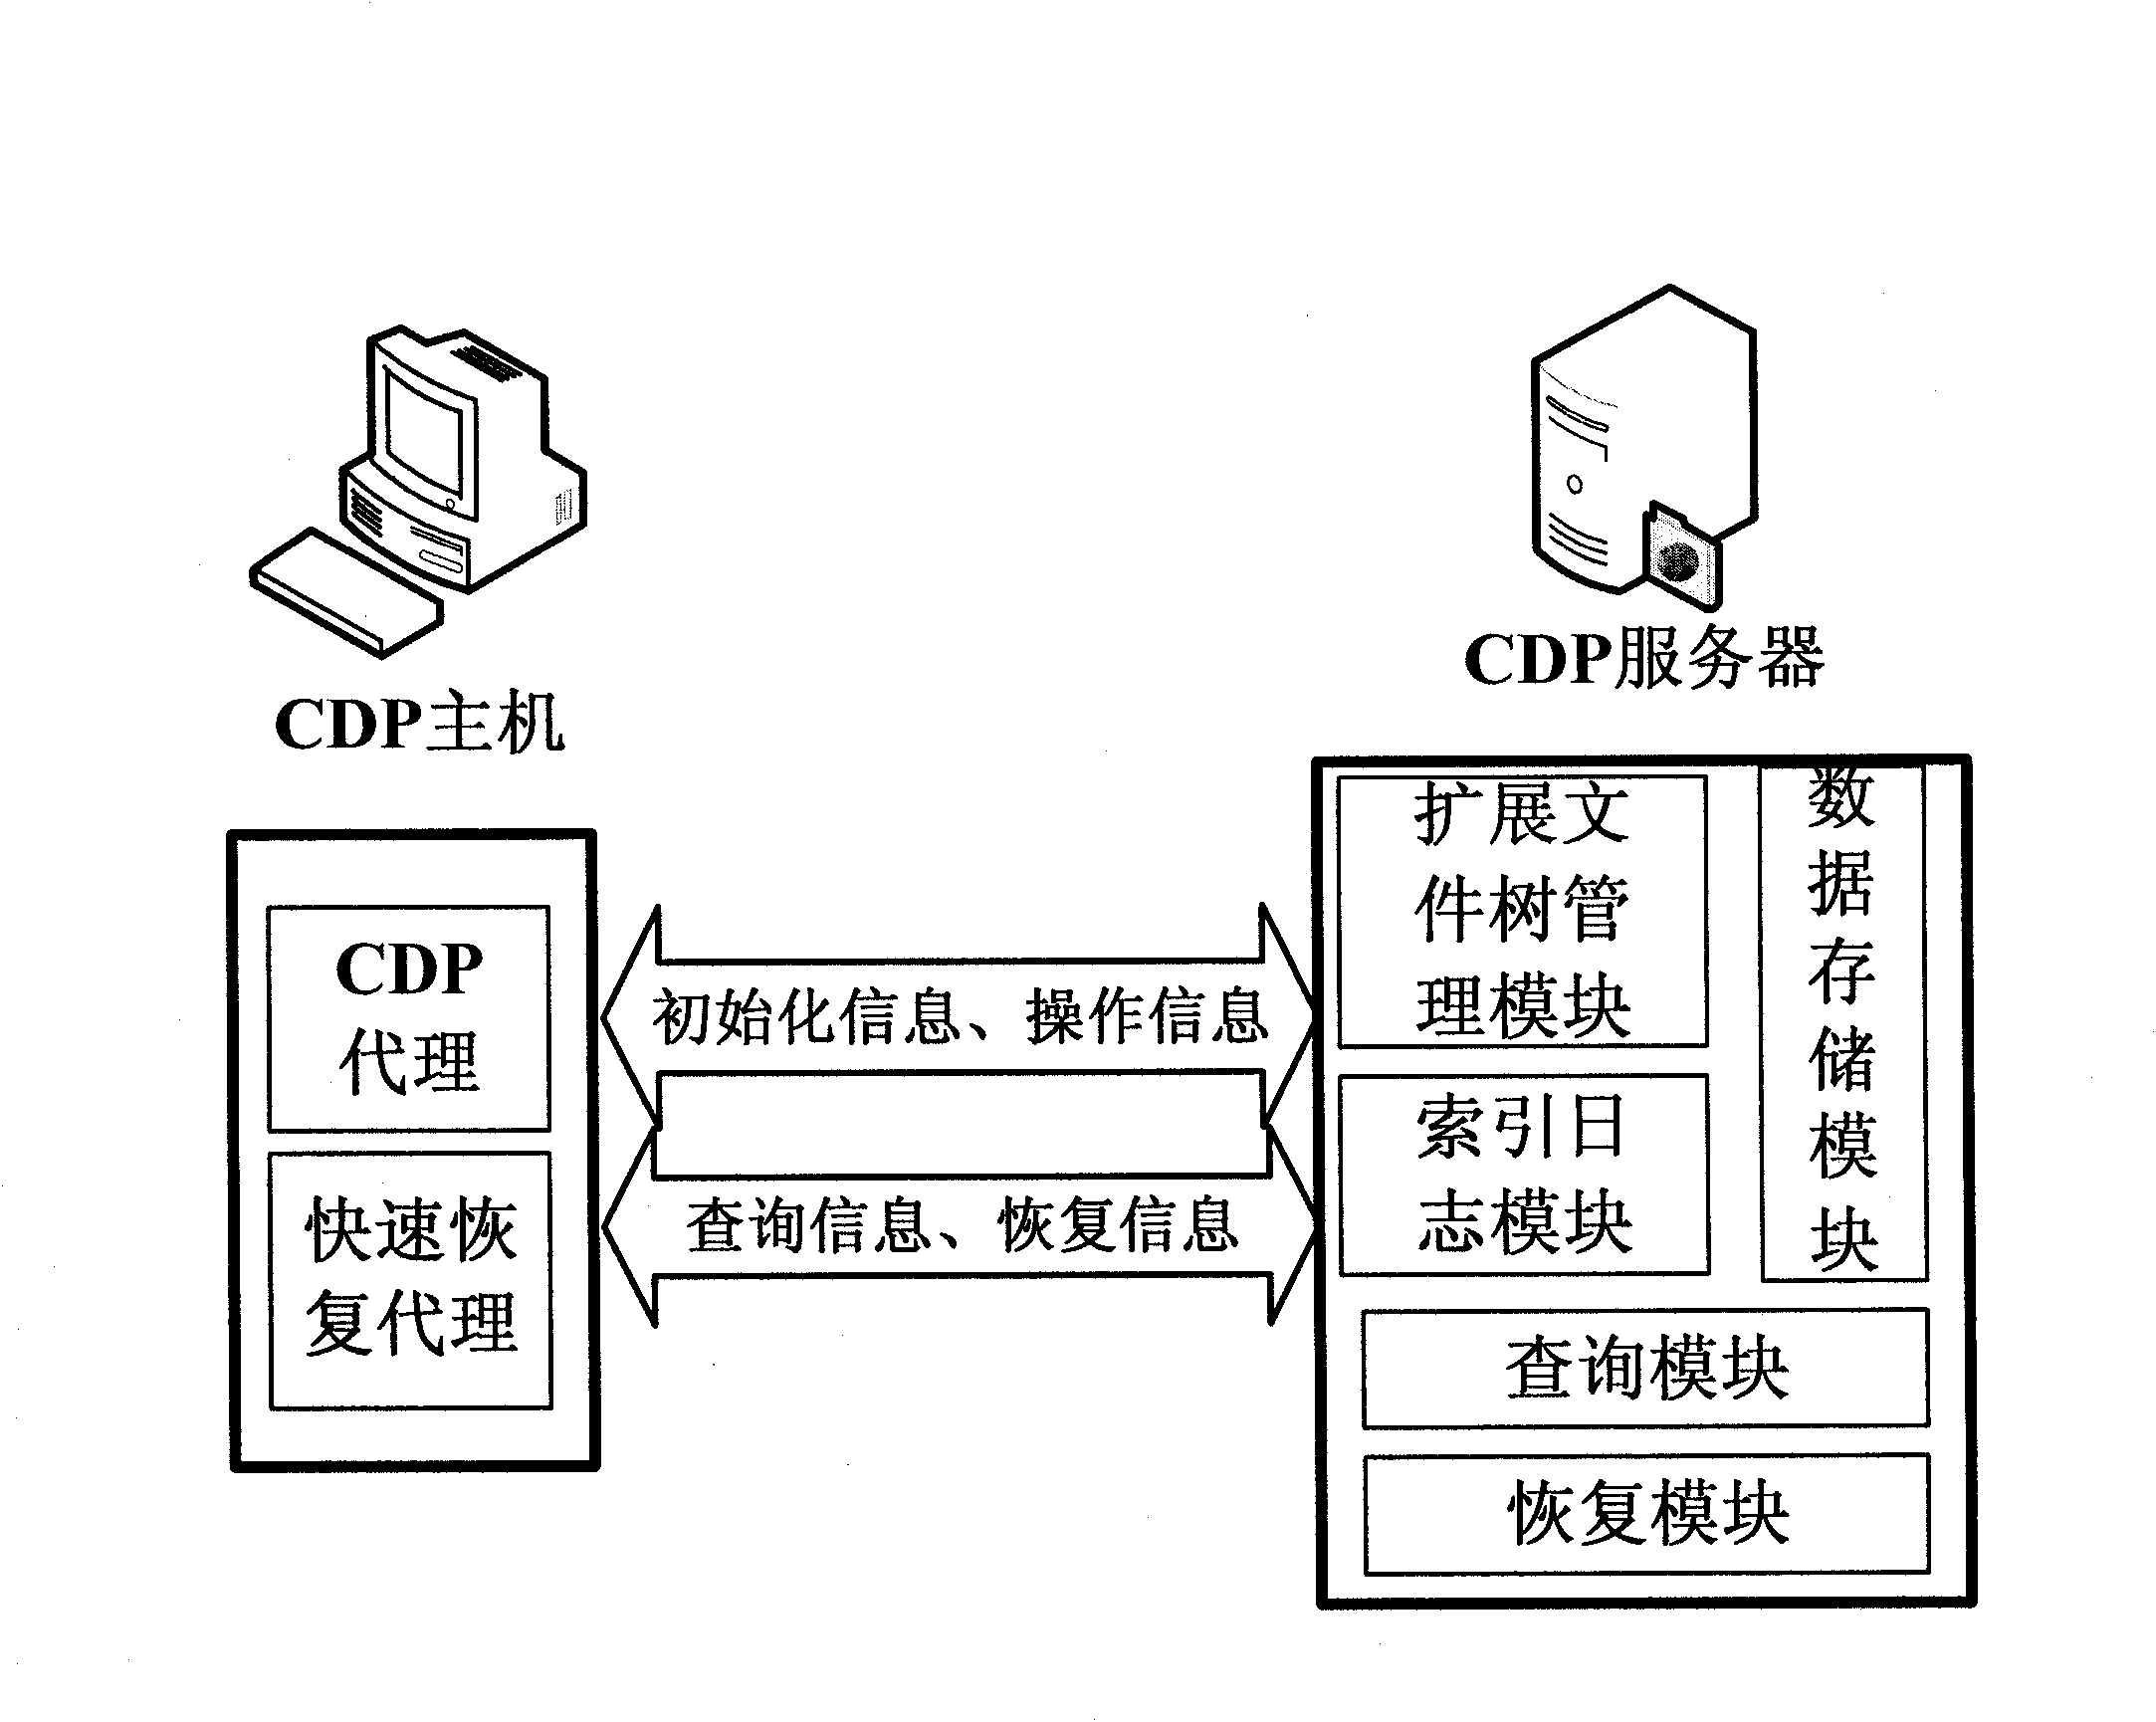 Continuous data protection method and system supporting data inquiry and quick recovery